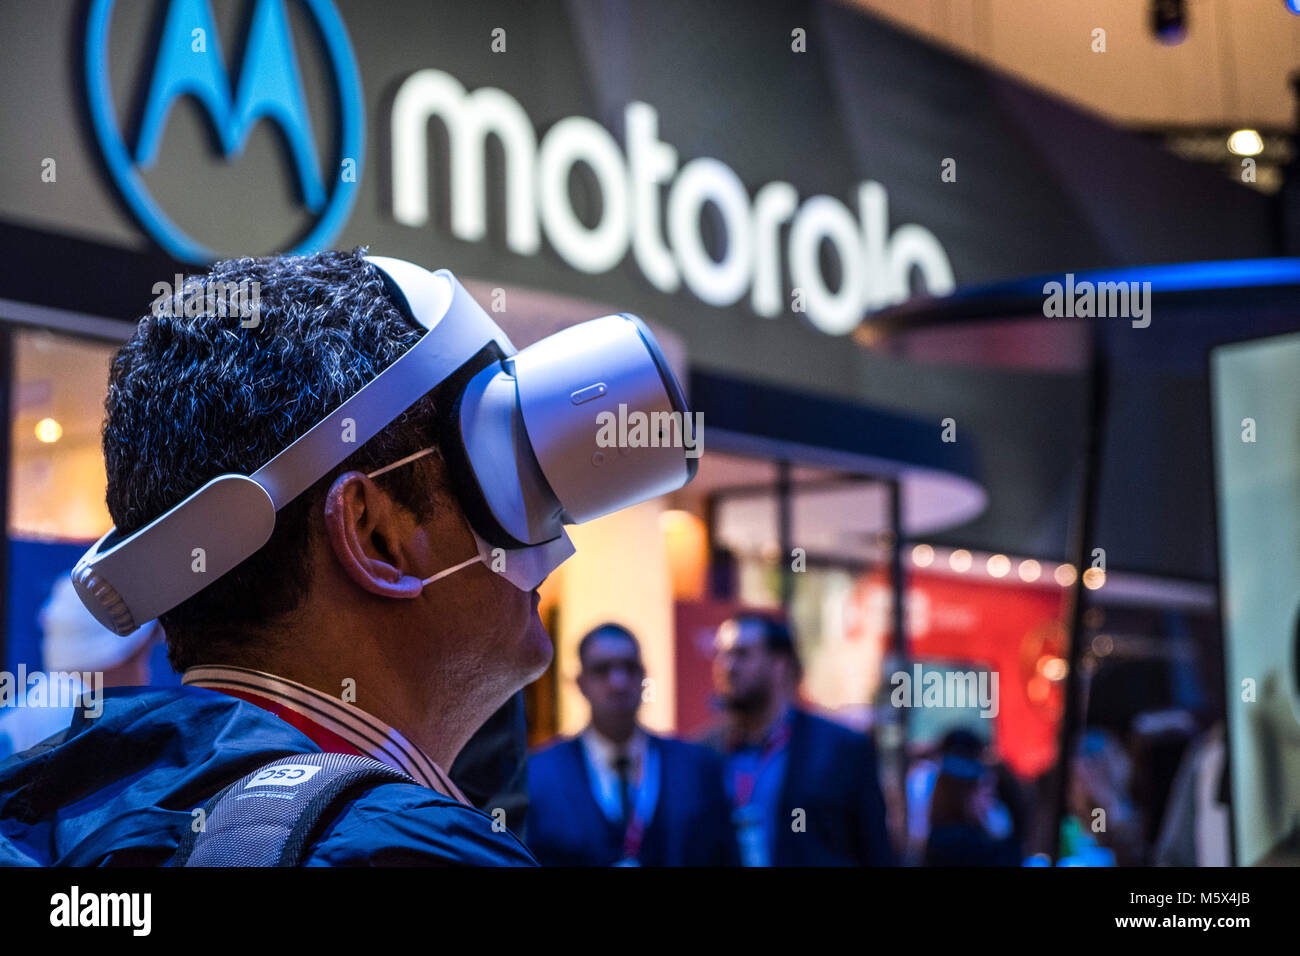 Barcelona, Catalonia, Spain. 26th Feb, 2018. Virtual reality goggles seen  in Motorola stand at the Mobile World Congress. The Mobile World Congress  held in Barcelona, Spain, since 2006 and will be held